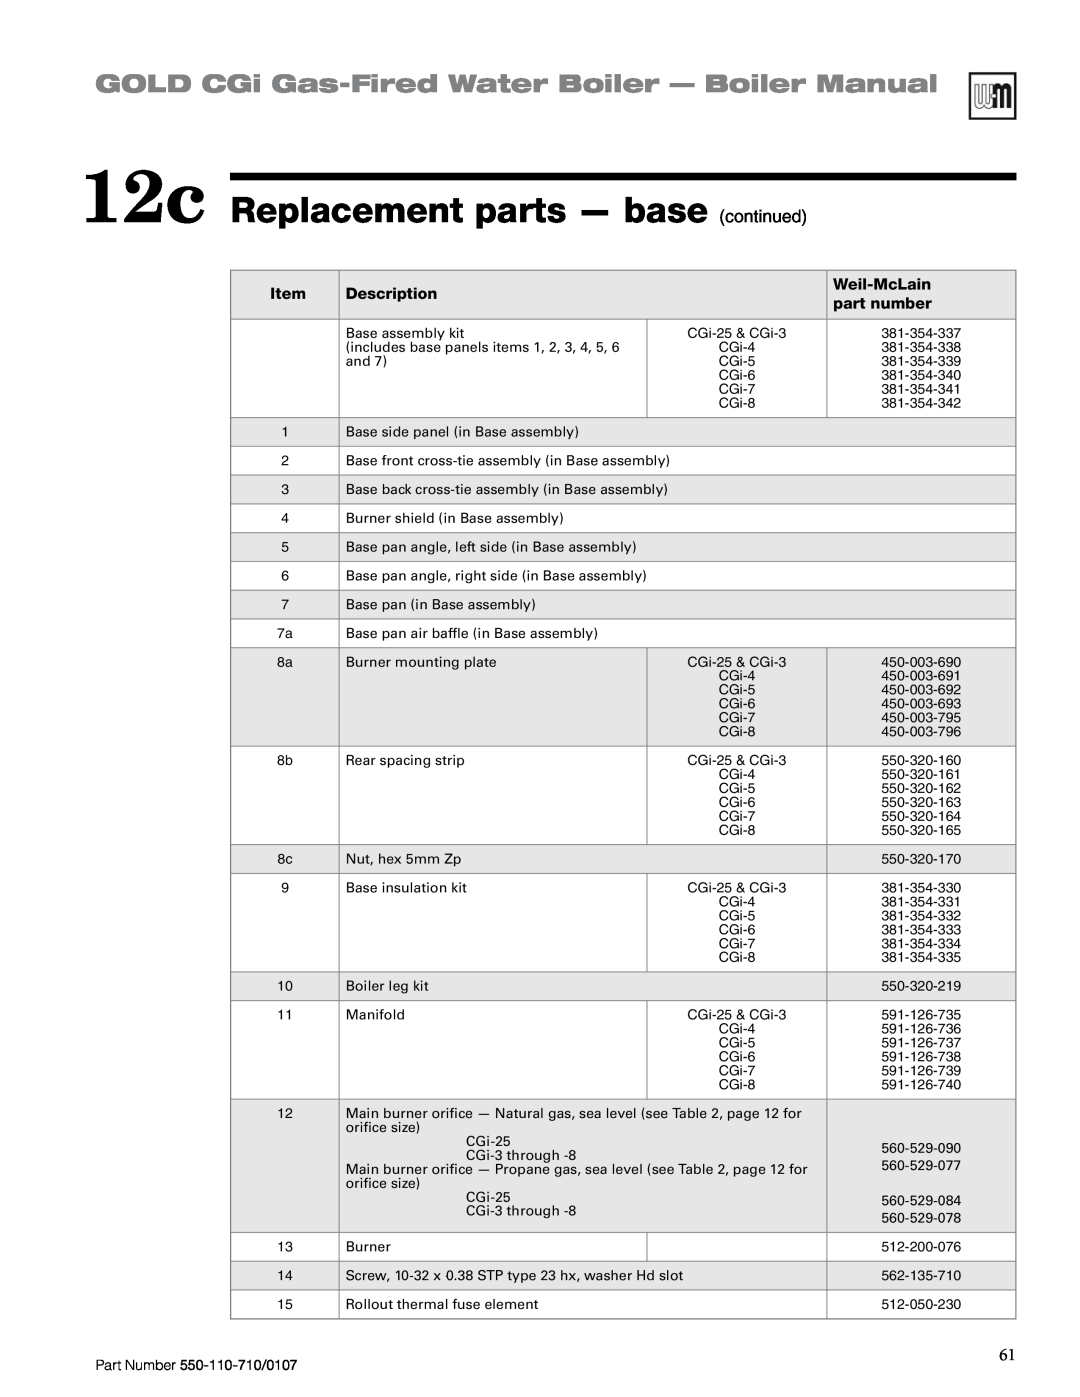 Weil-McLain Series 2 manual 12c Replacement parts — base continued, GOLD CGi Gas-FiredWater Boiler — Boiler Manual, Item 